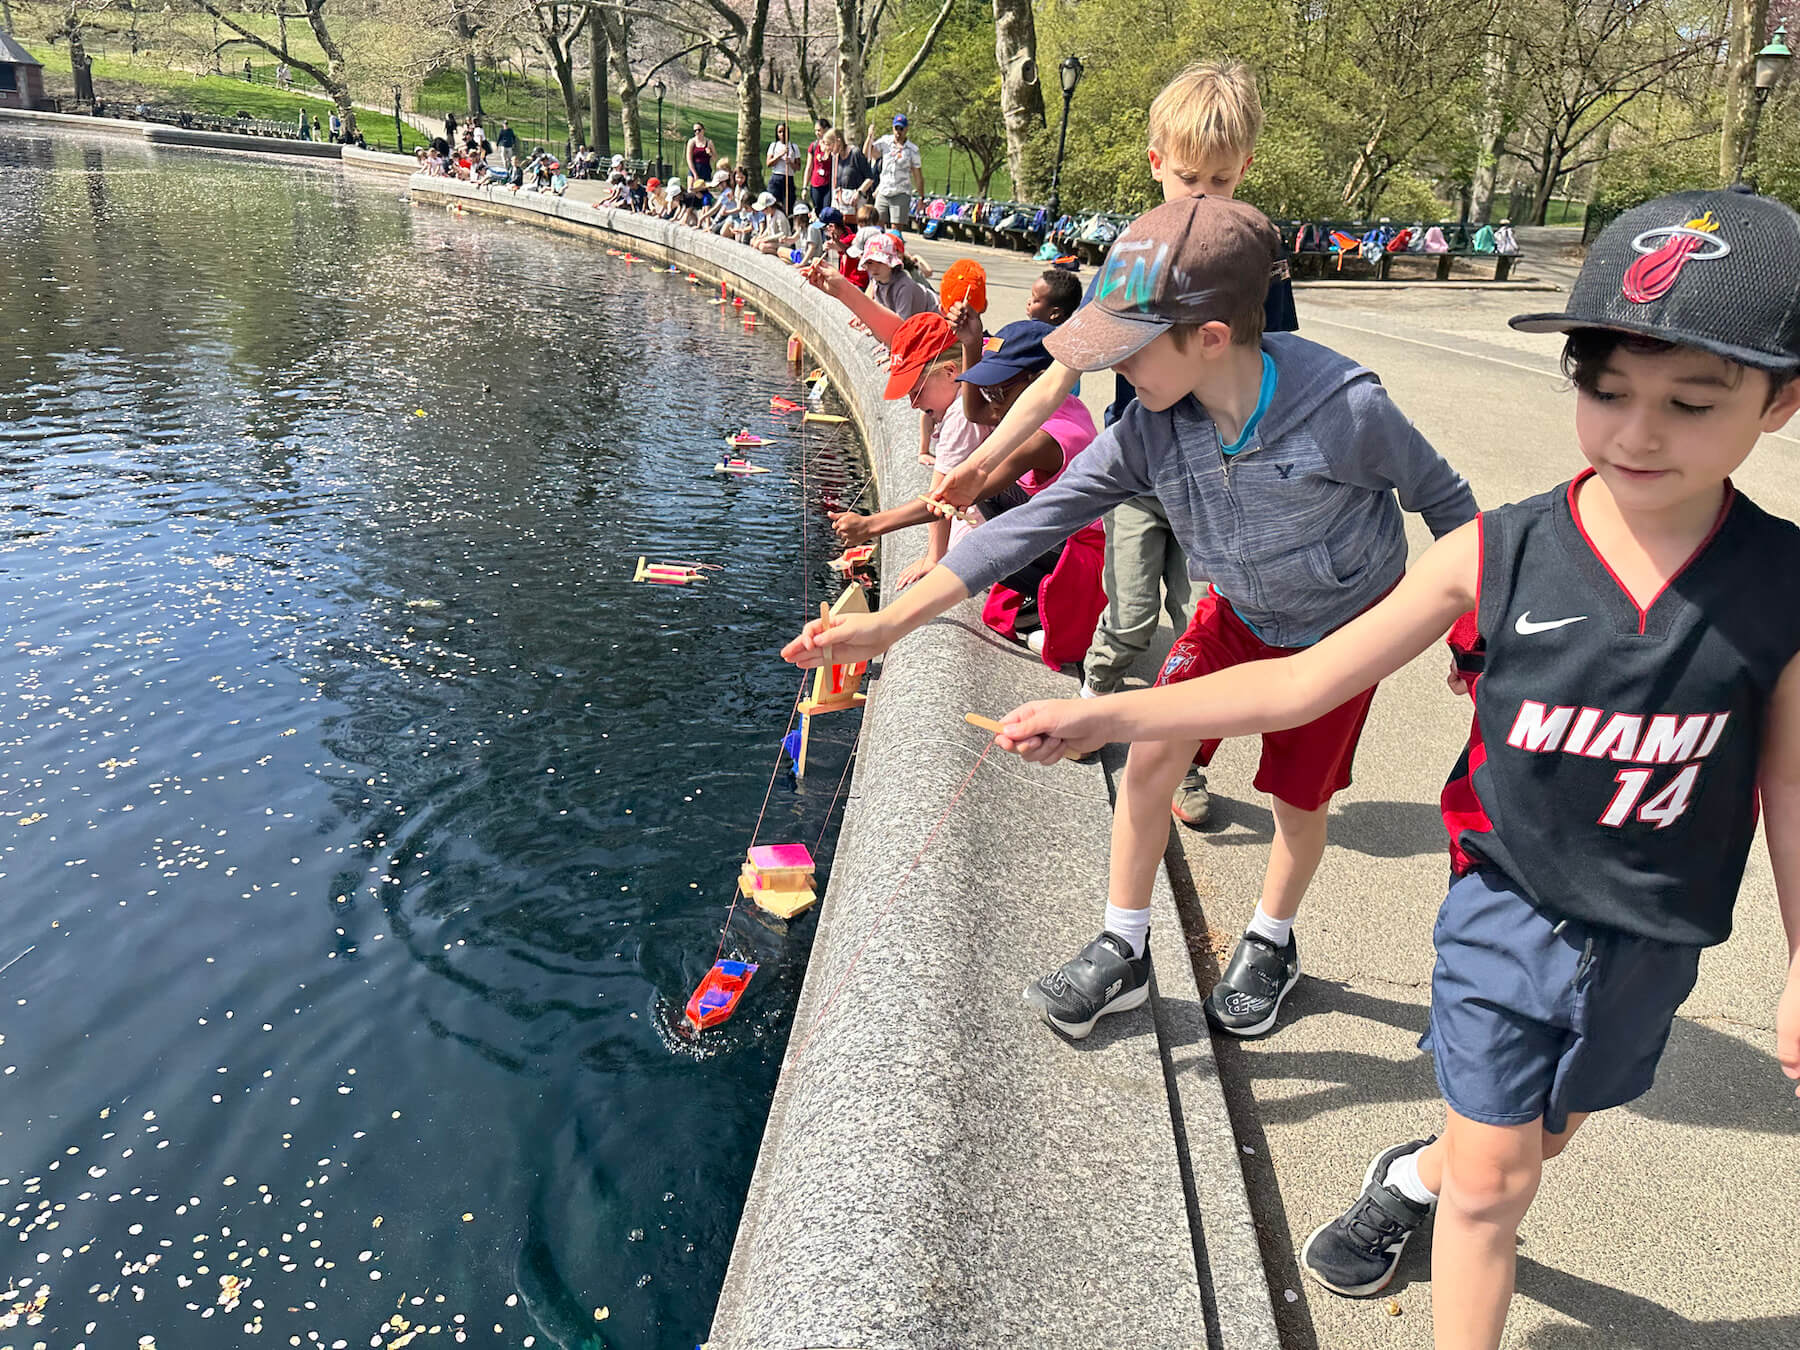 Group of Ethical Culture Fieldston School Ethical Culture students launching handmade sail boats into water in Central Park